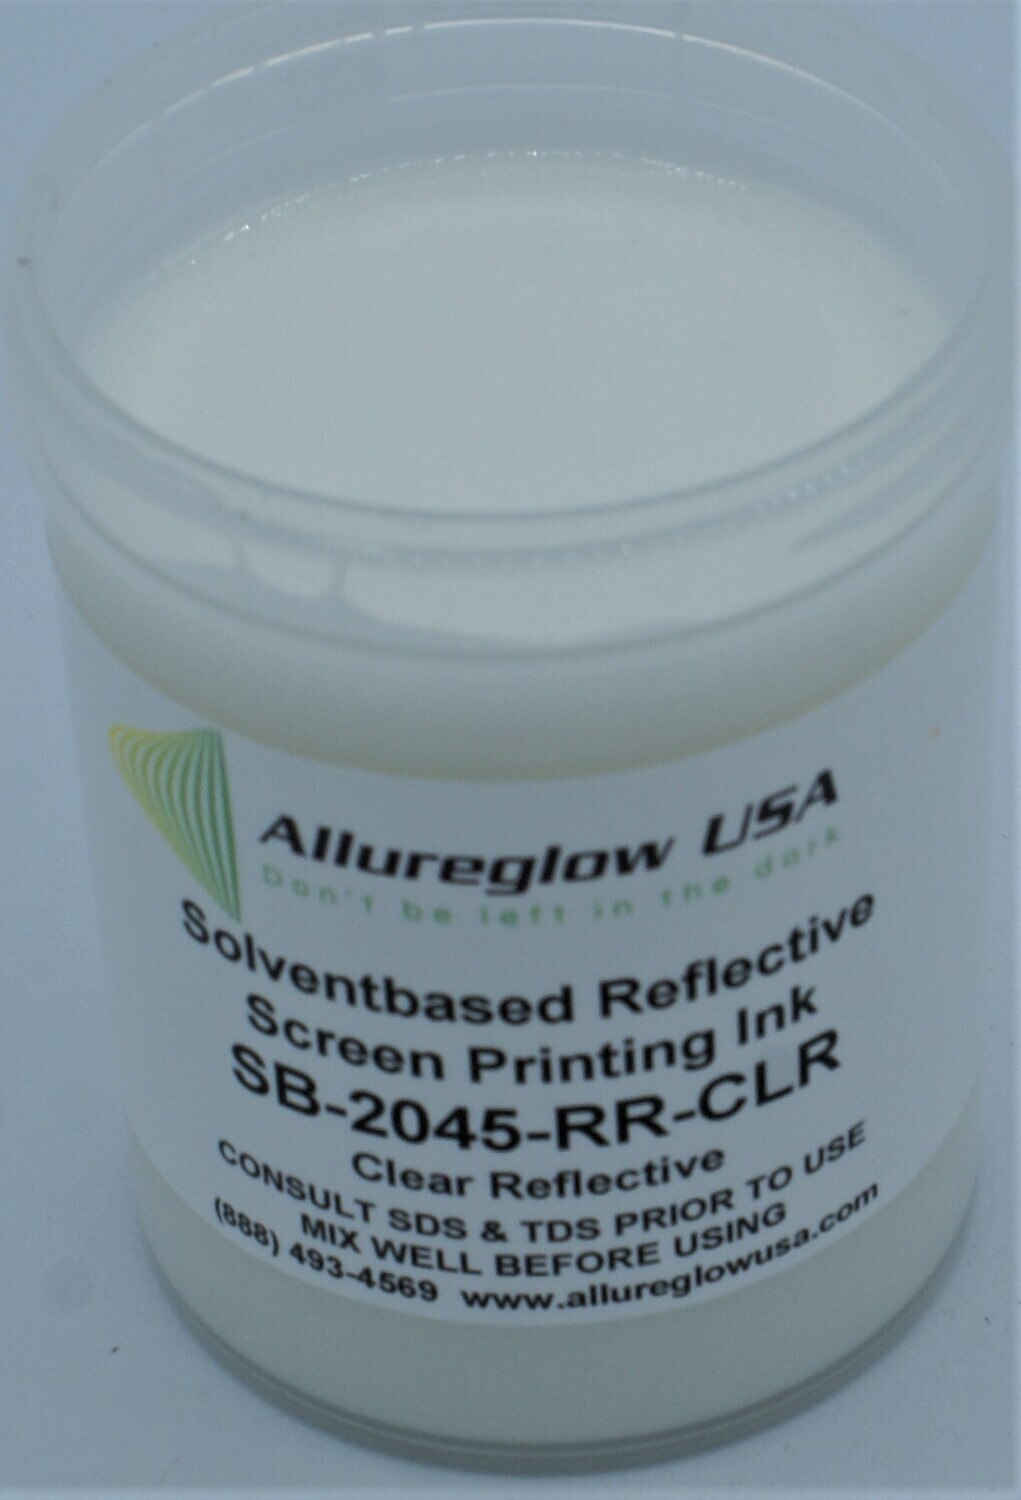 SB-2045-RR-CLR-8OZ  SOLVENT BASED CLEAR REFLECTIVE SCREEN PRINTING INK - 8OZ